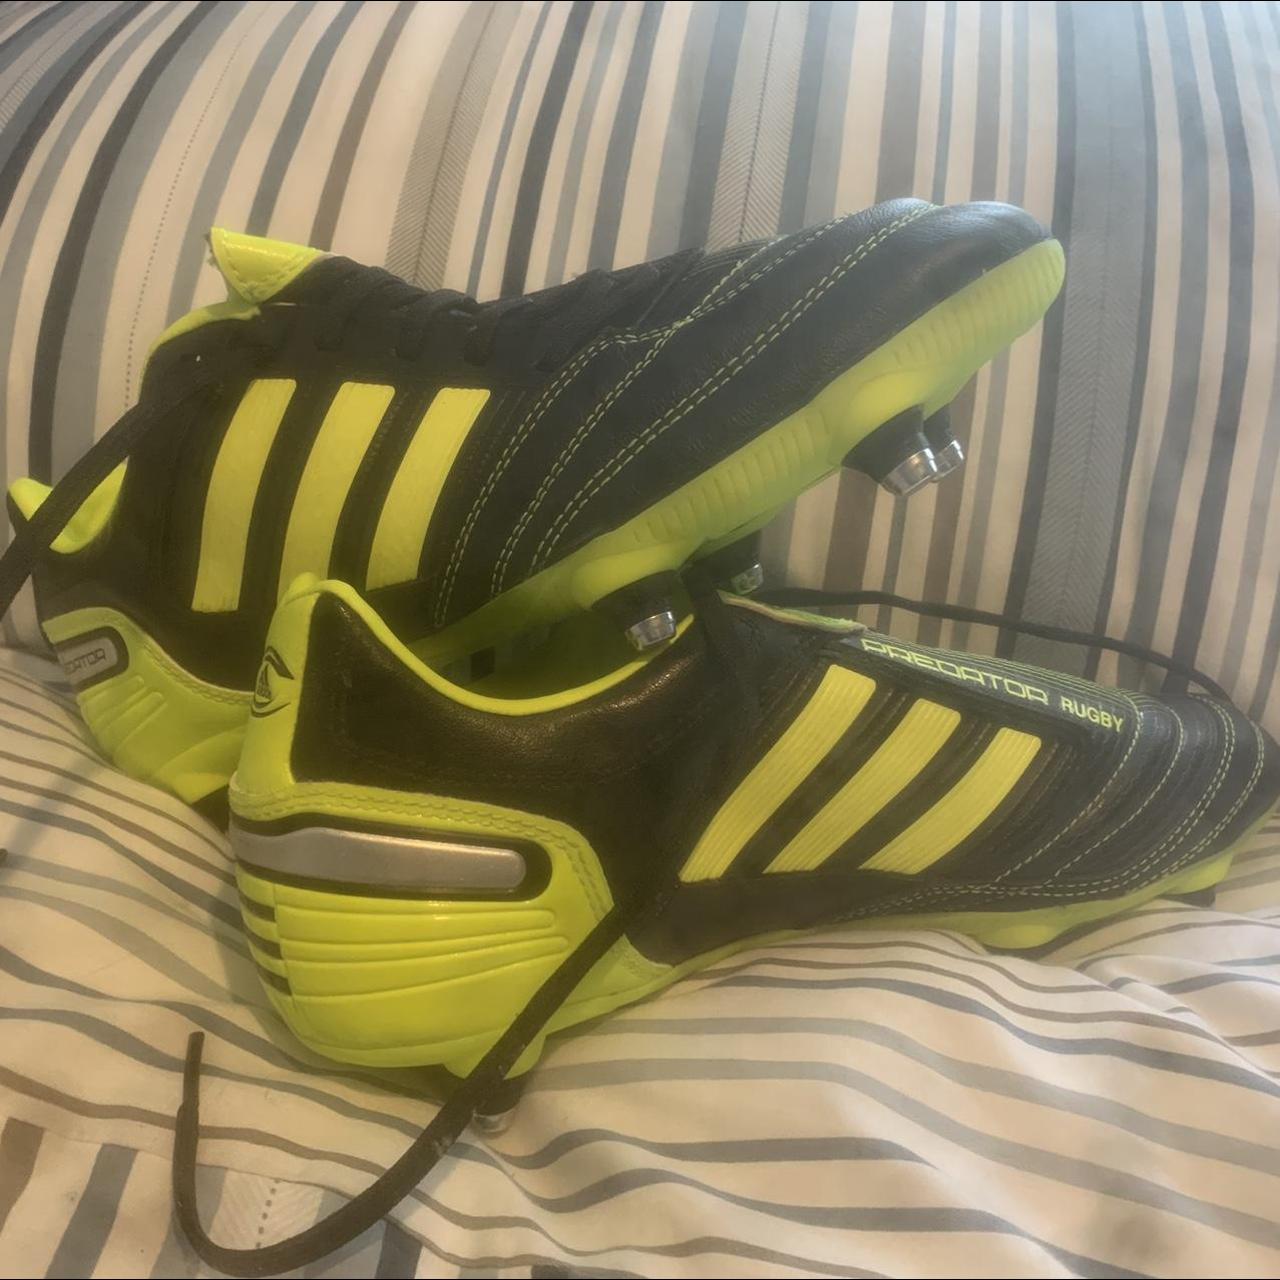 Adidas Predator RUGBY Boots size 8. I think these... - Depop